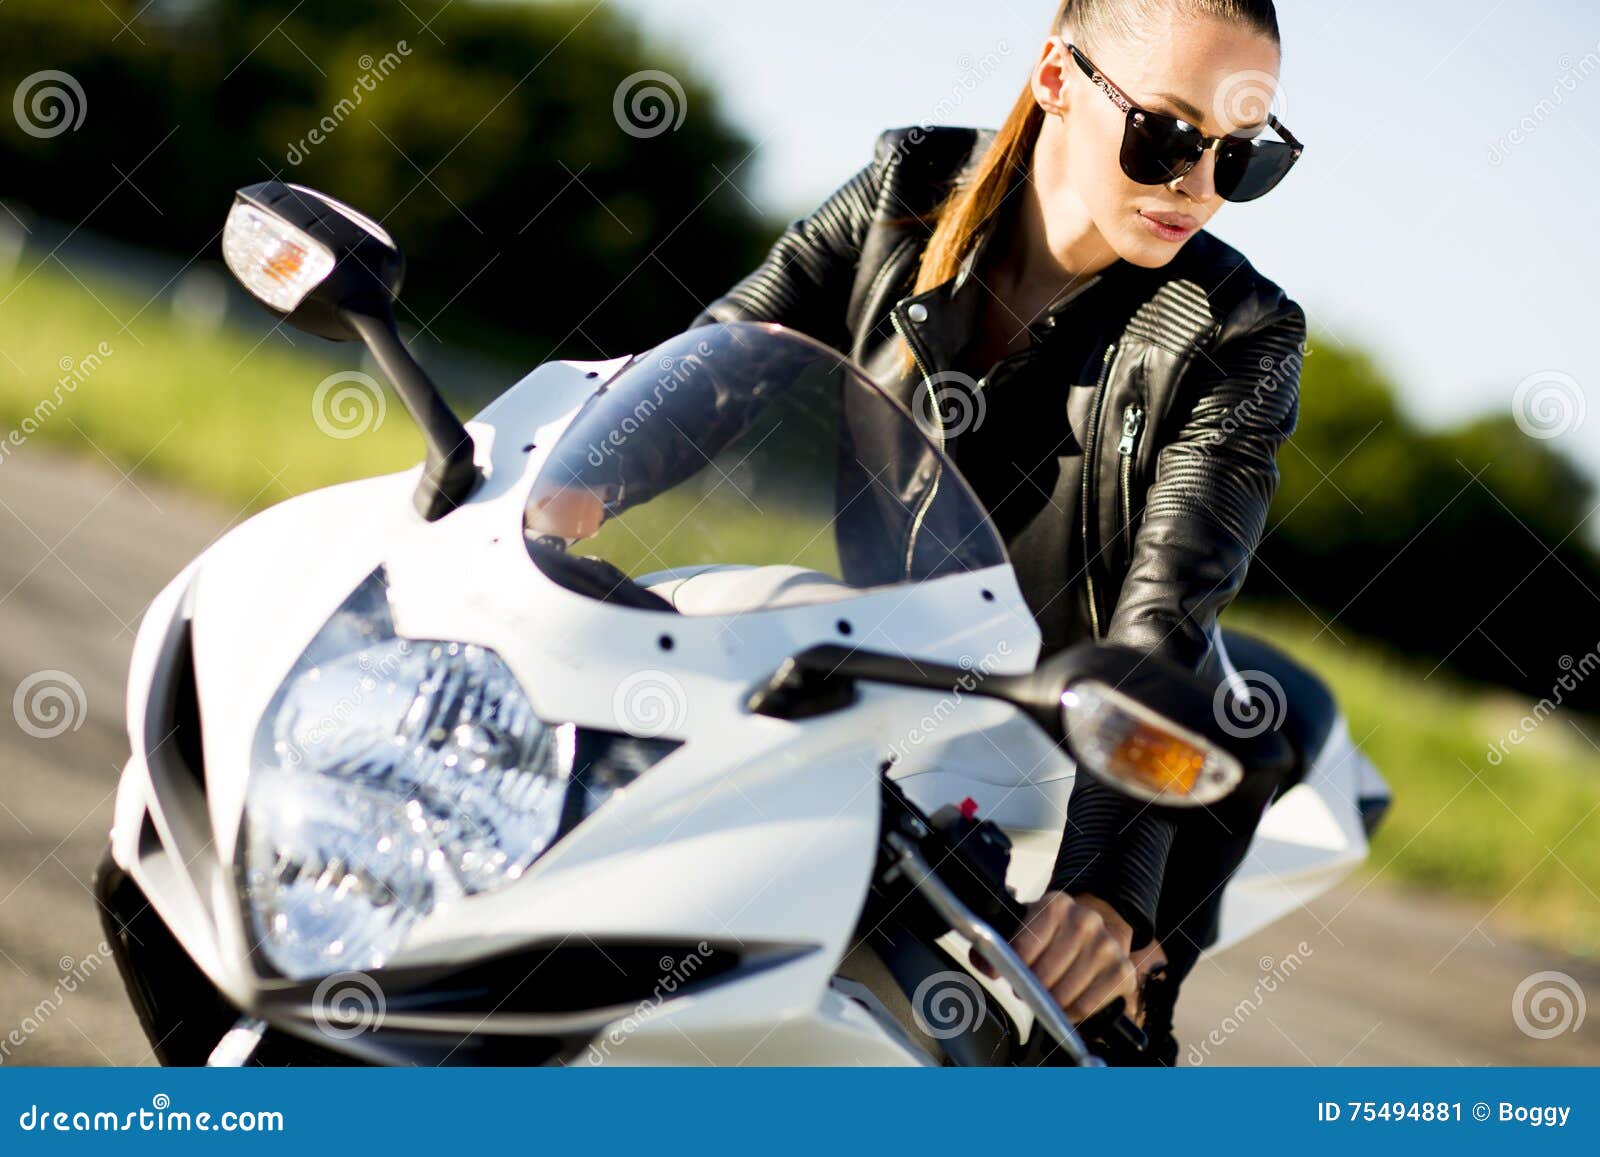 Woman on motorcycle stock image. Image of speed, beauty - 75494881